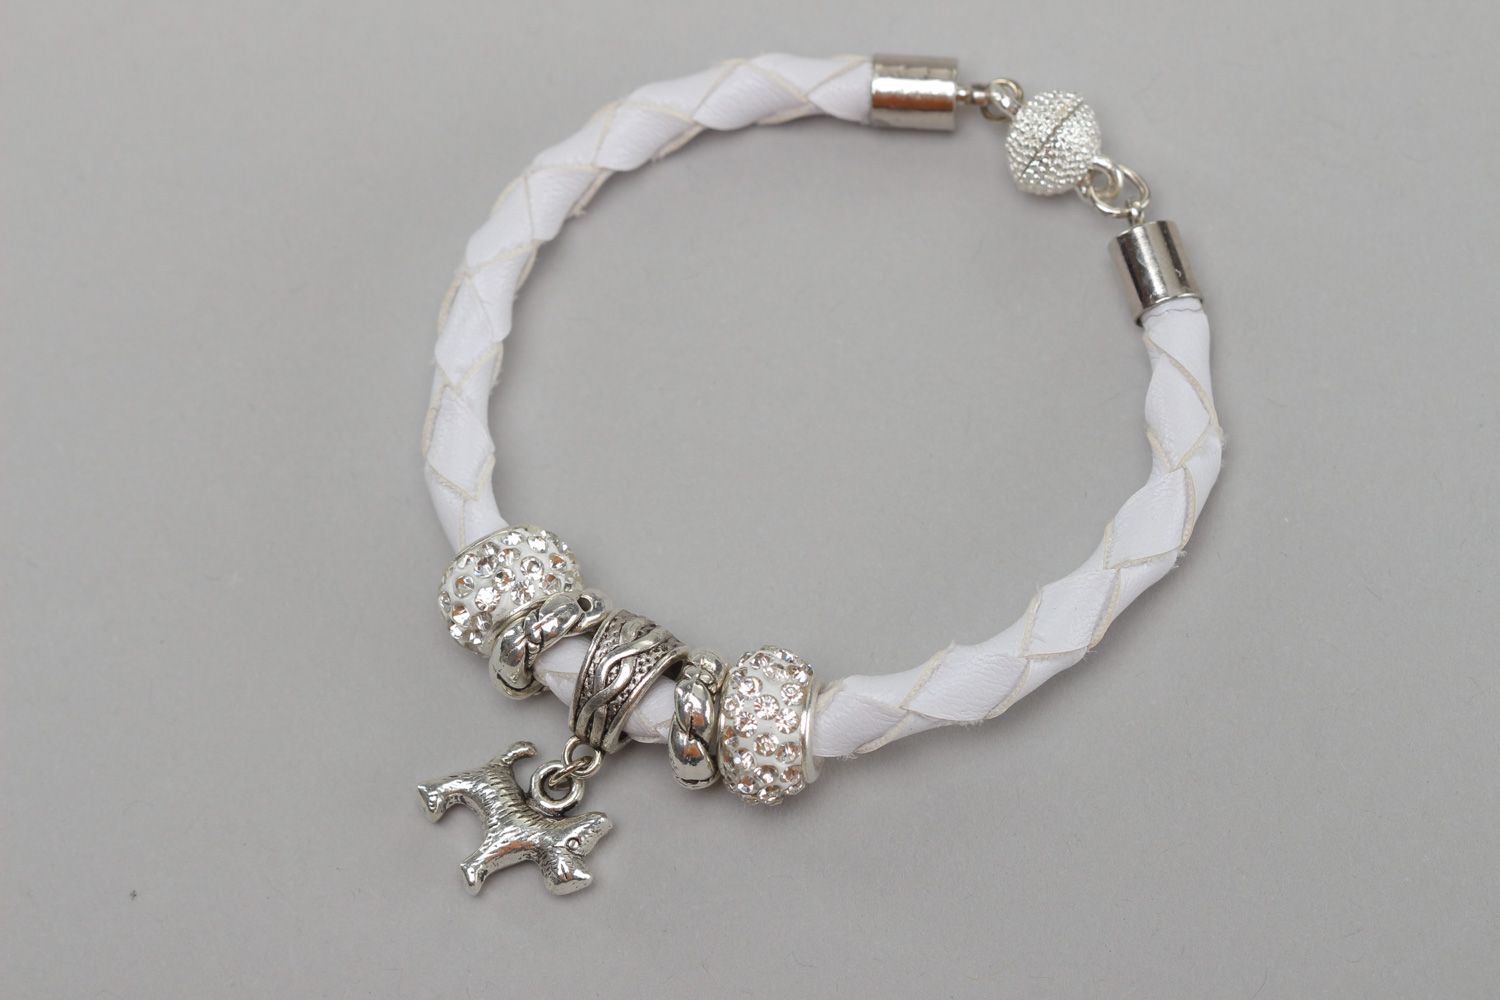 Handmade wrist bracelet woven of white faux leather with metal dog charm photo 4